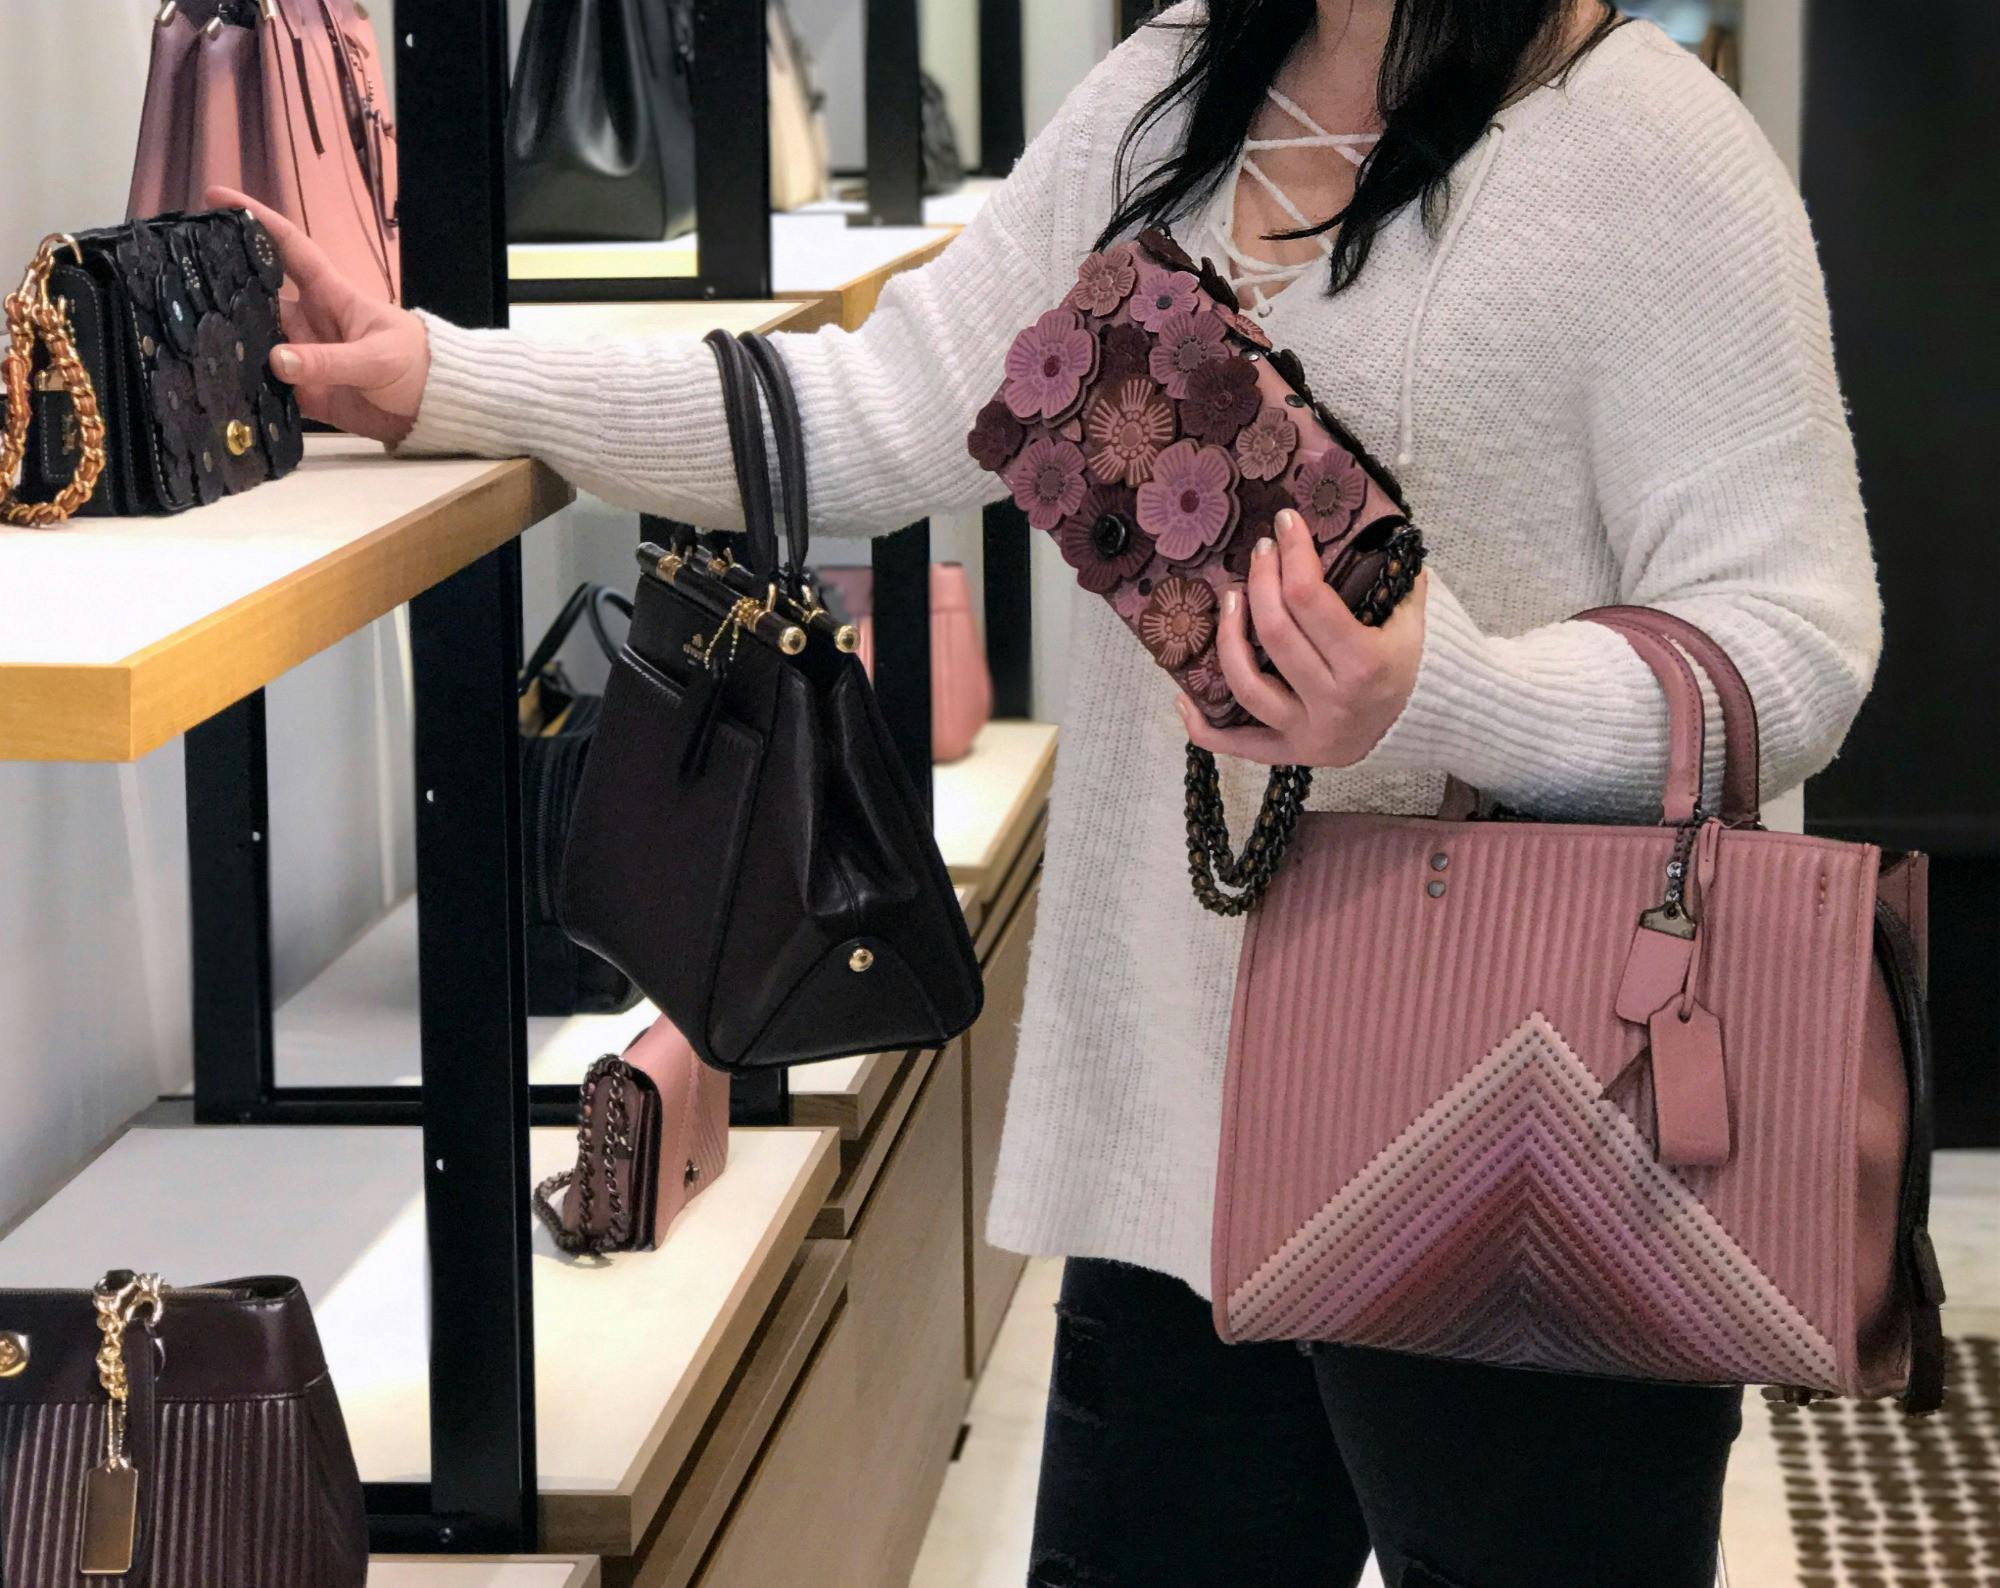 10 Ways to Save at Coach Outlet Every Time You Shop The Real Deal by  RetailMeNot Ways to Save at Coach Outlet